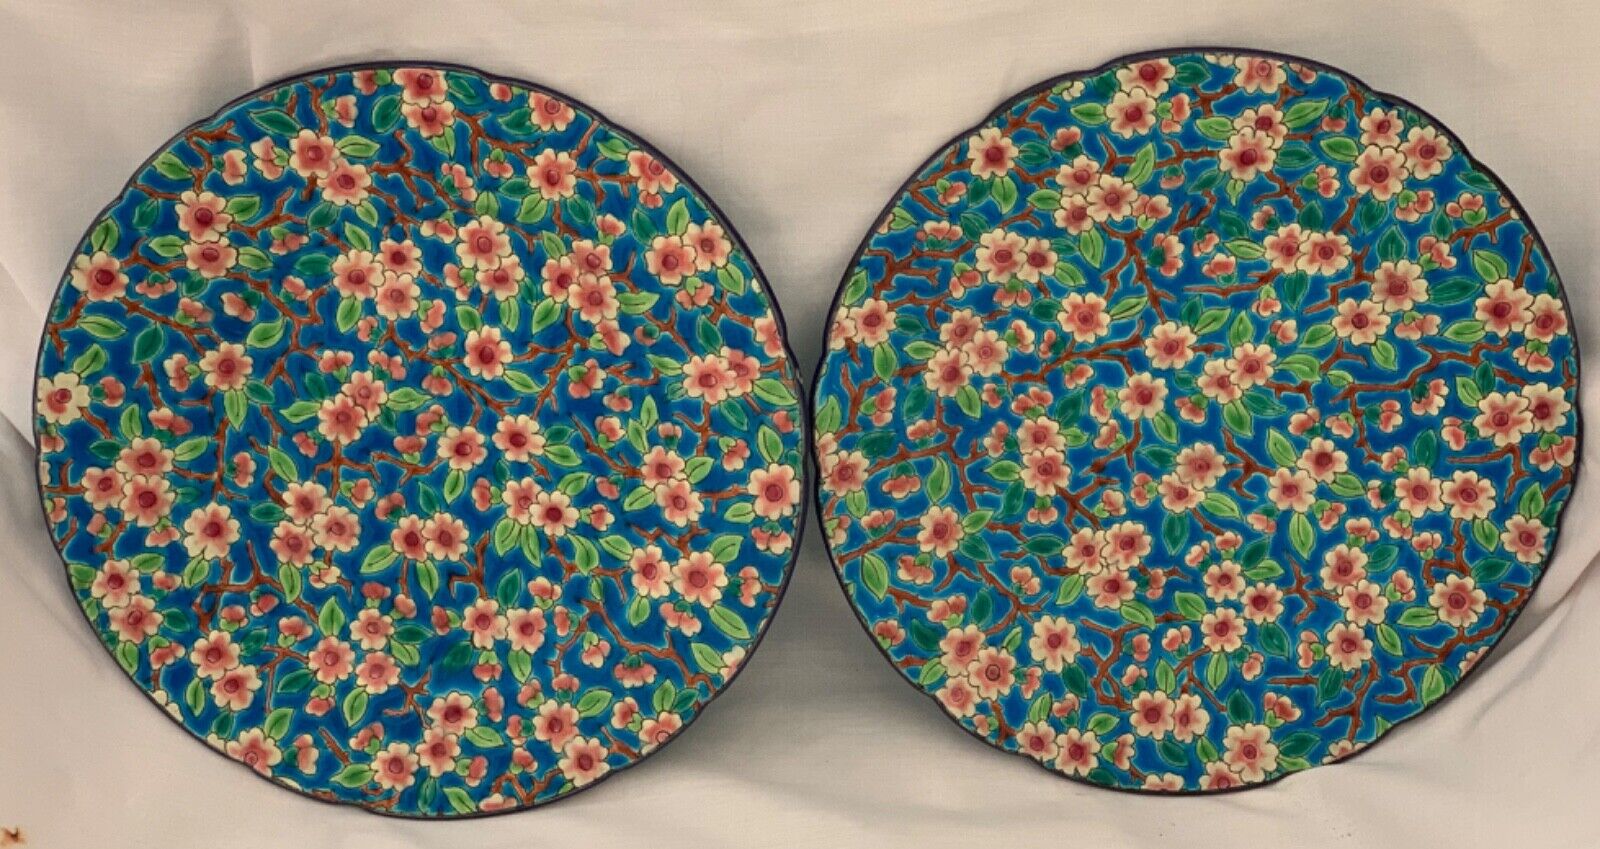 Rare antique pair of Longwy plates decorated in cloisonné style with spring blos